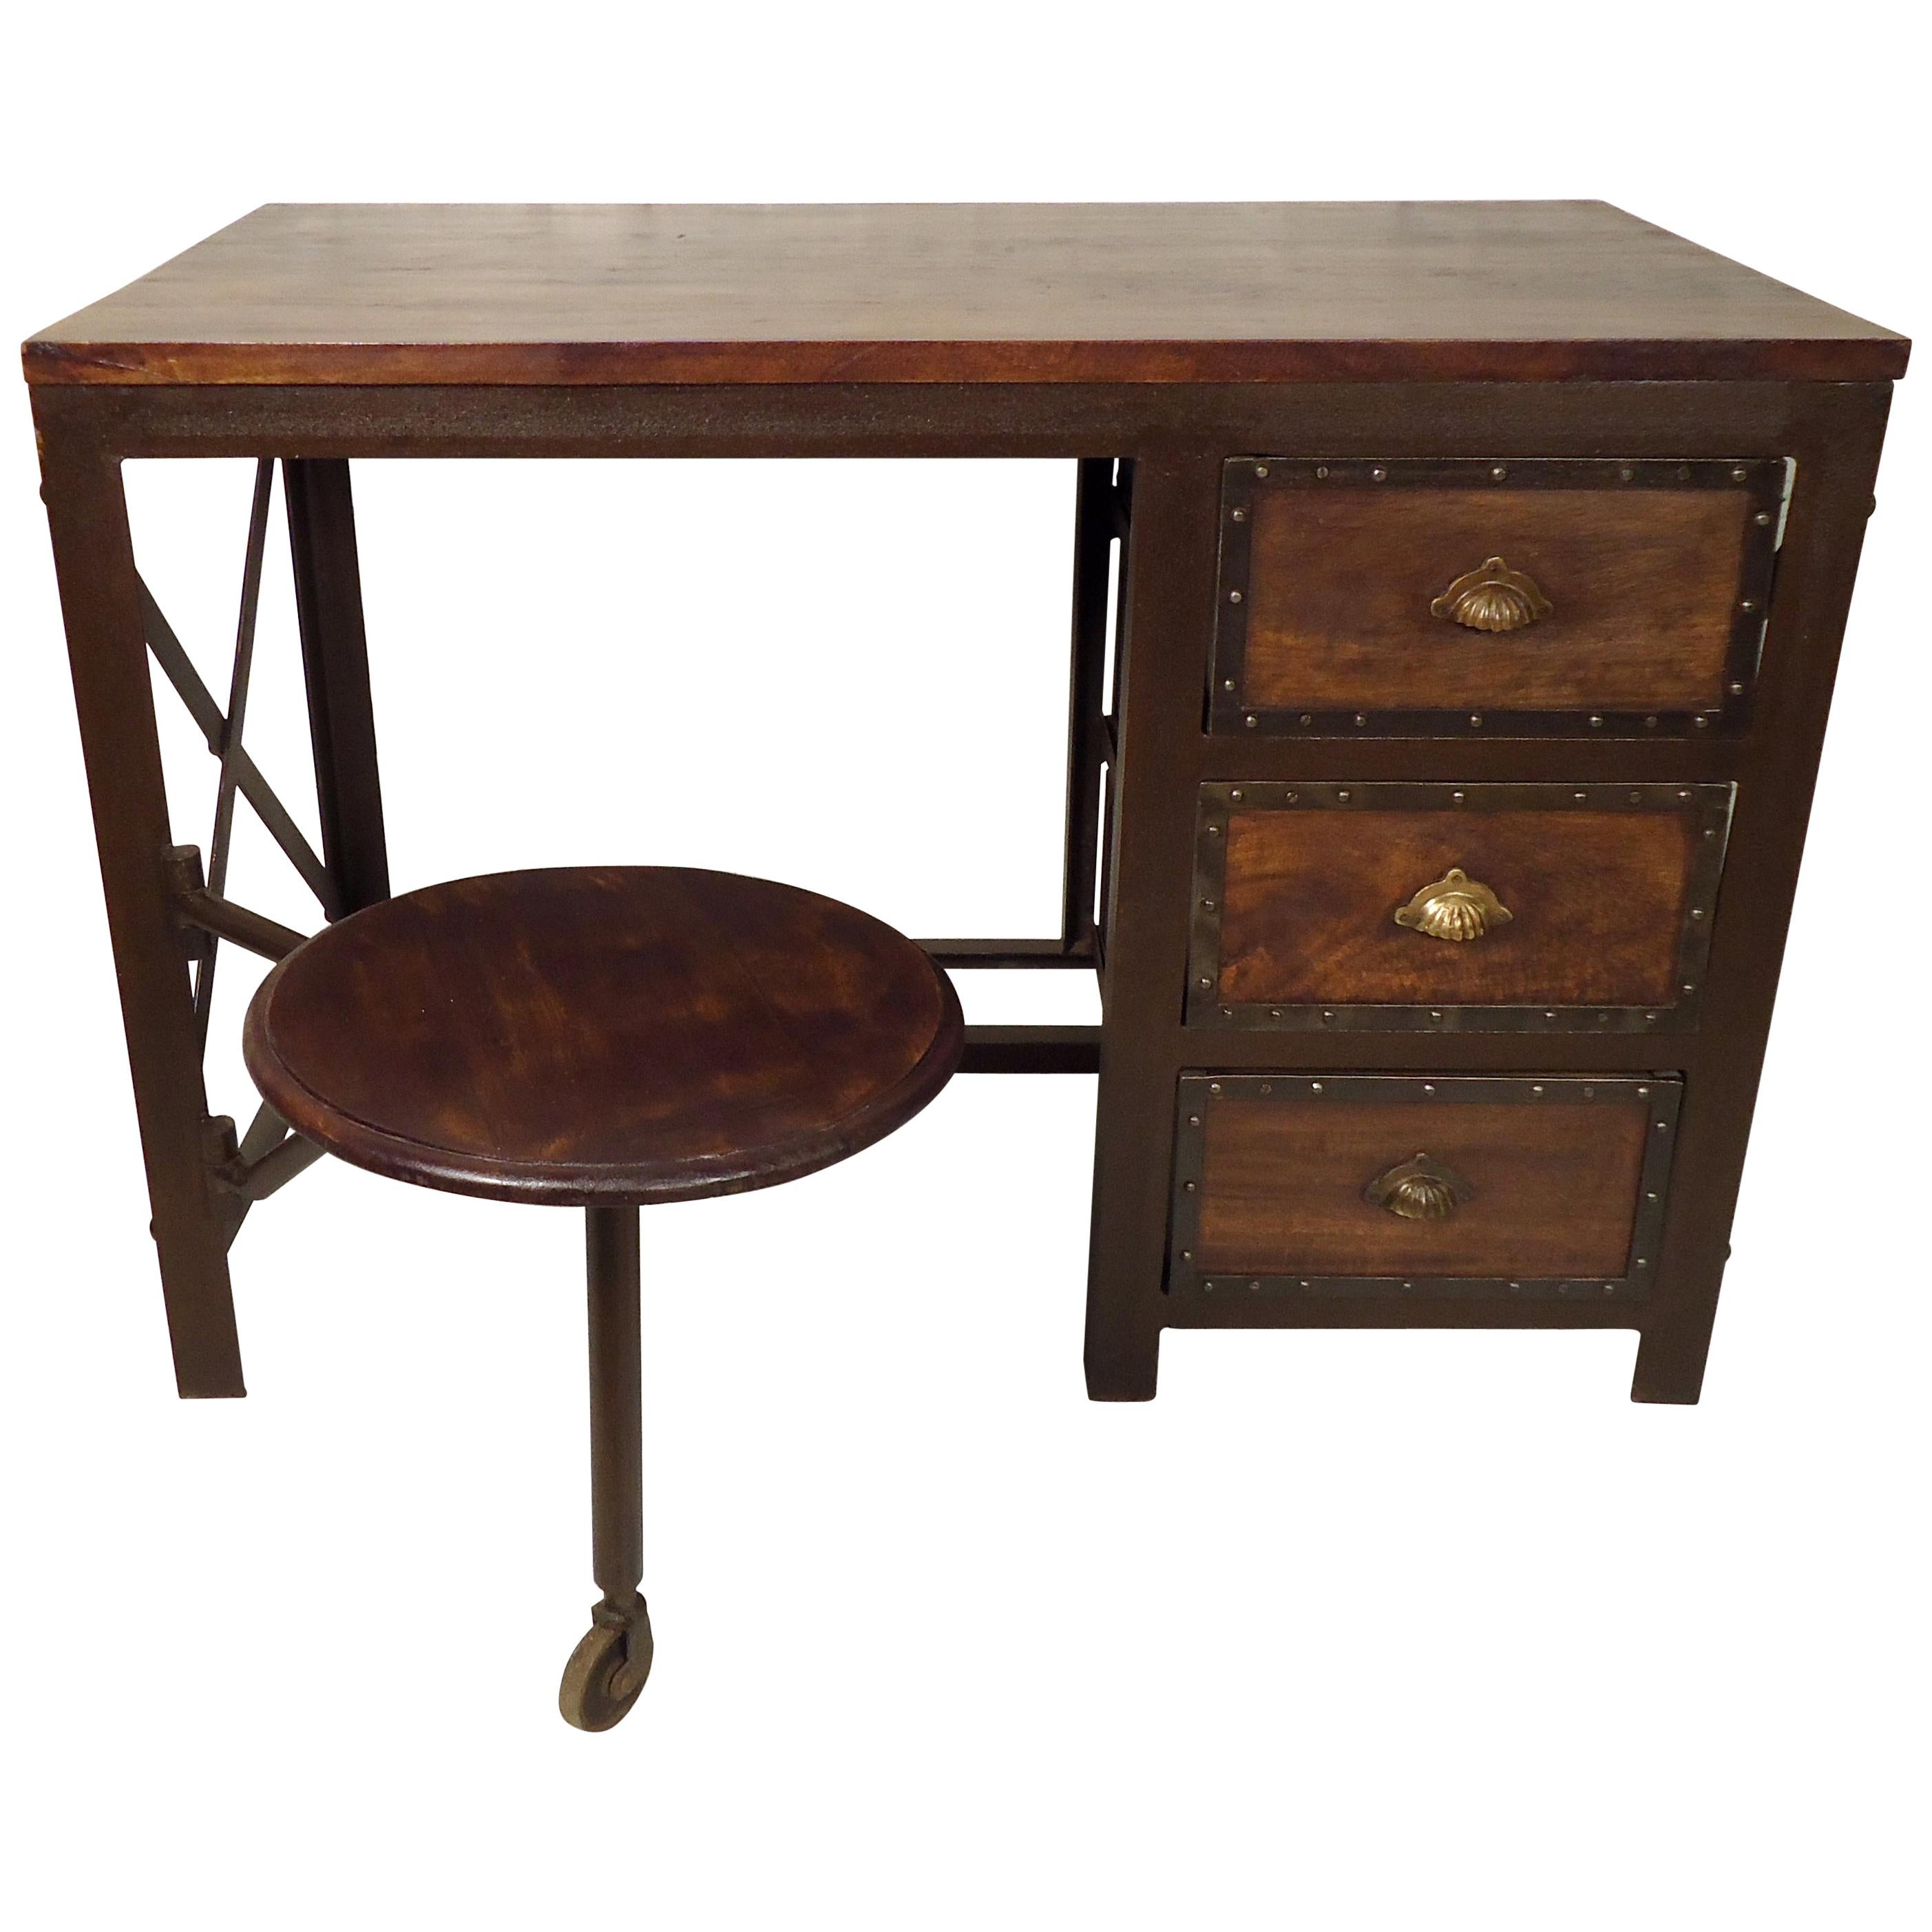 Vintage Industrial Writing Desk with Seat